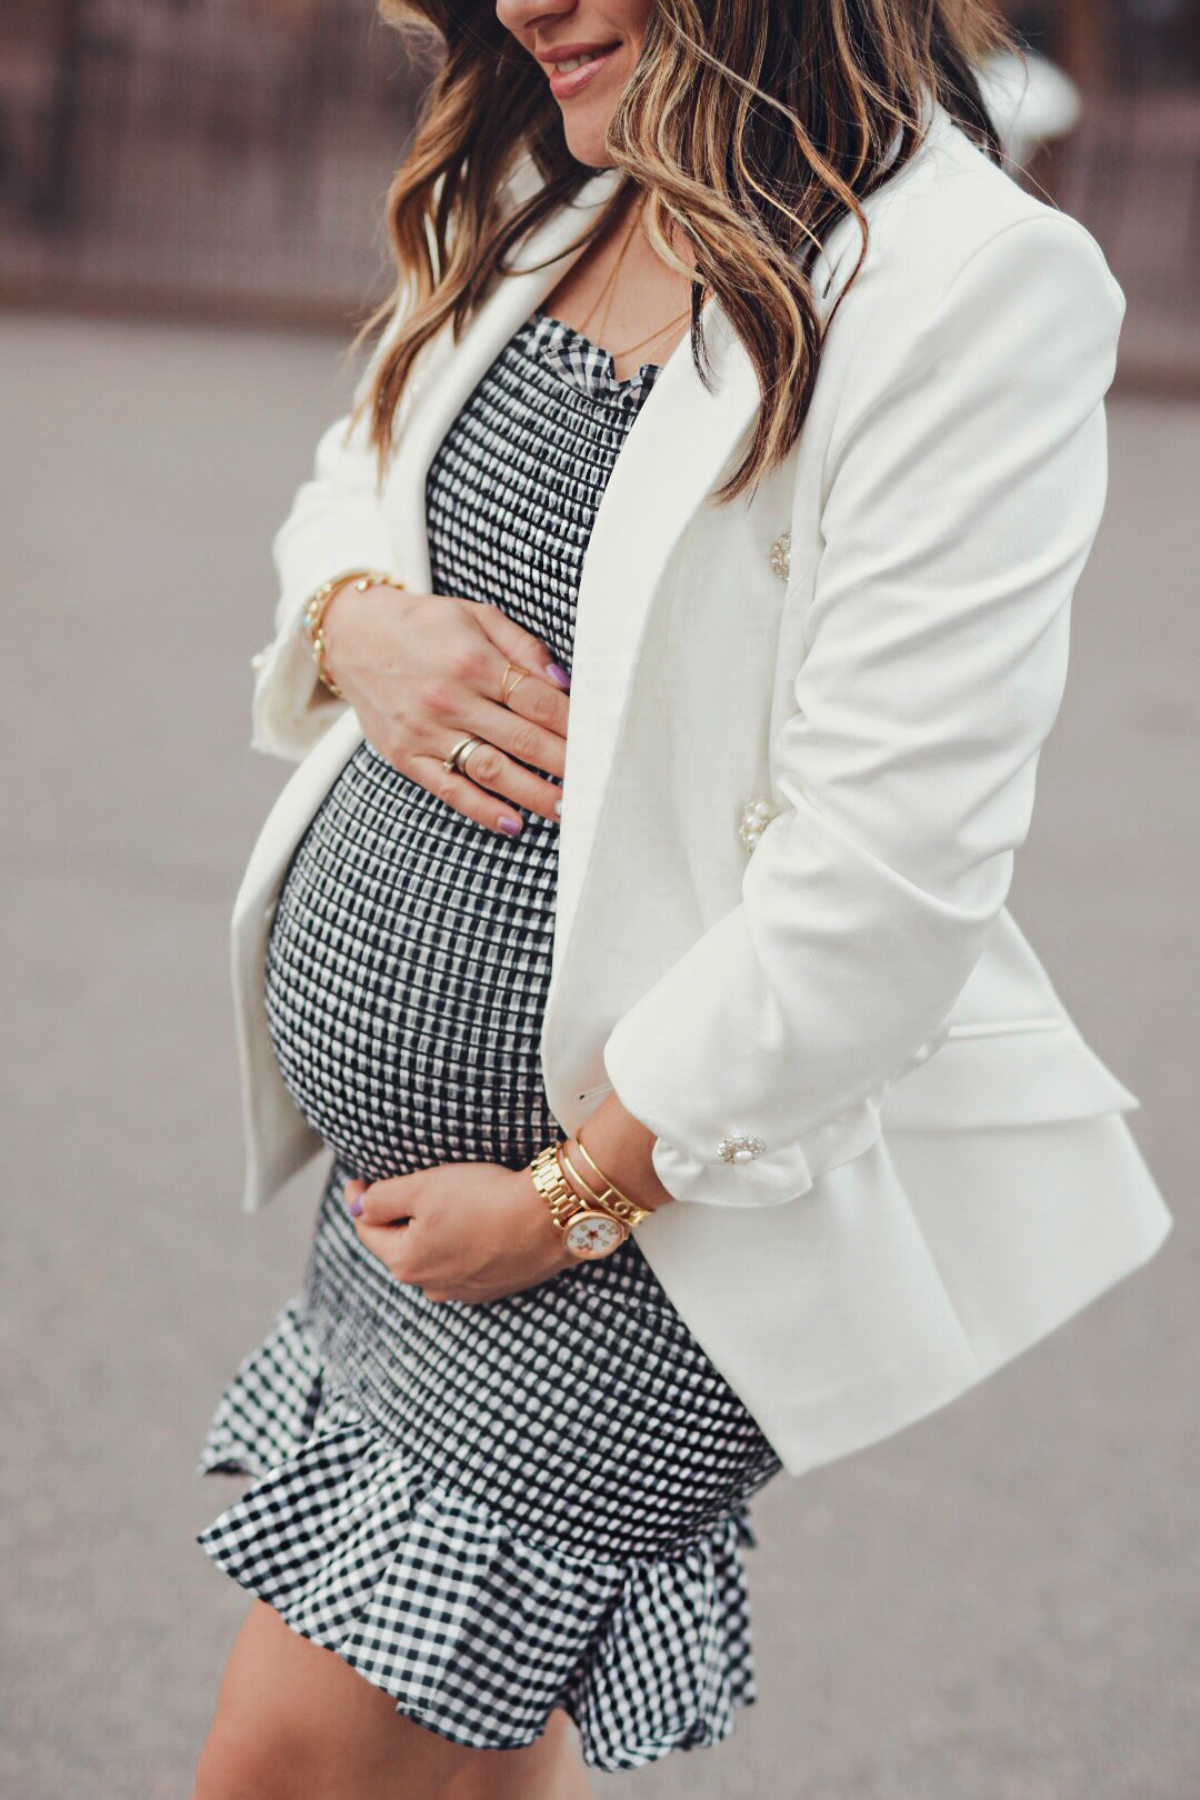 Carolina Hellal of Chic Talk shares tips to nail maternity and her favorite looks